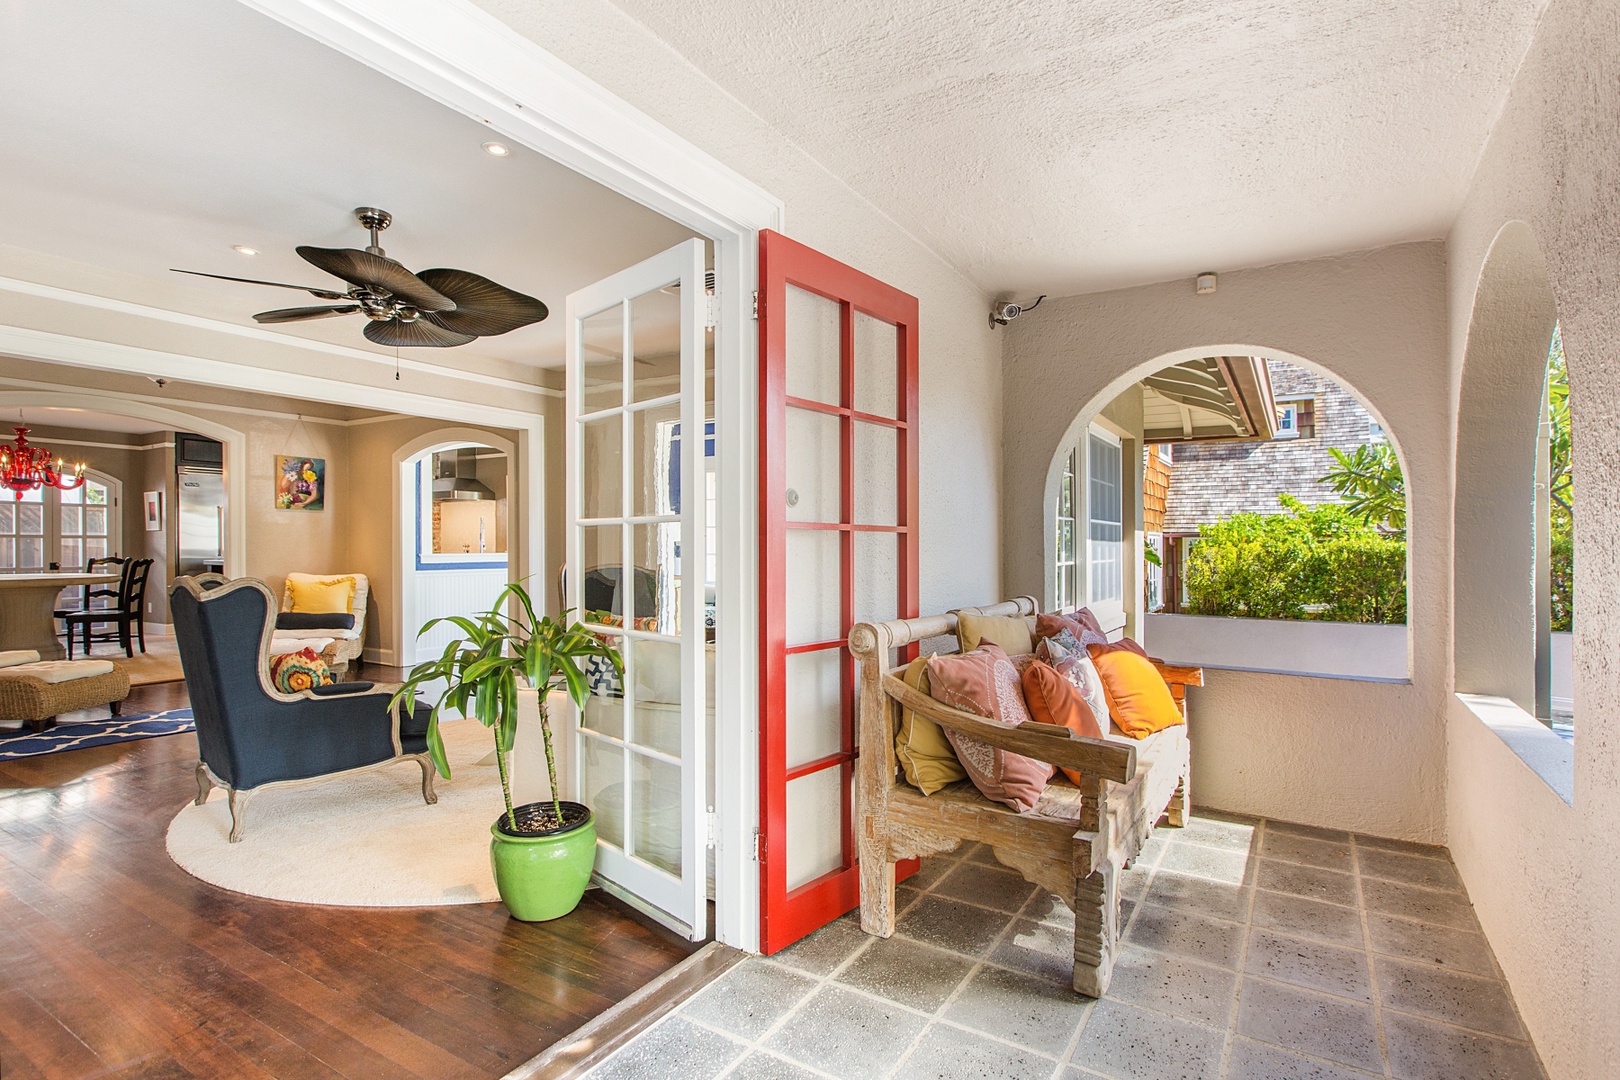 Honolulu Vacation Rentals, Hale Mahie - The front porch is the perfect spot to sit and enjoy your morning coffee while planning what adventures you will go on nearby!